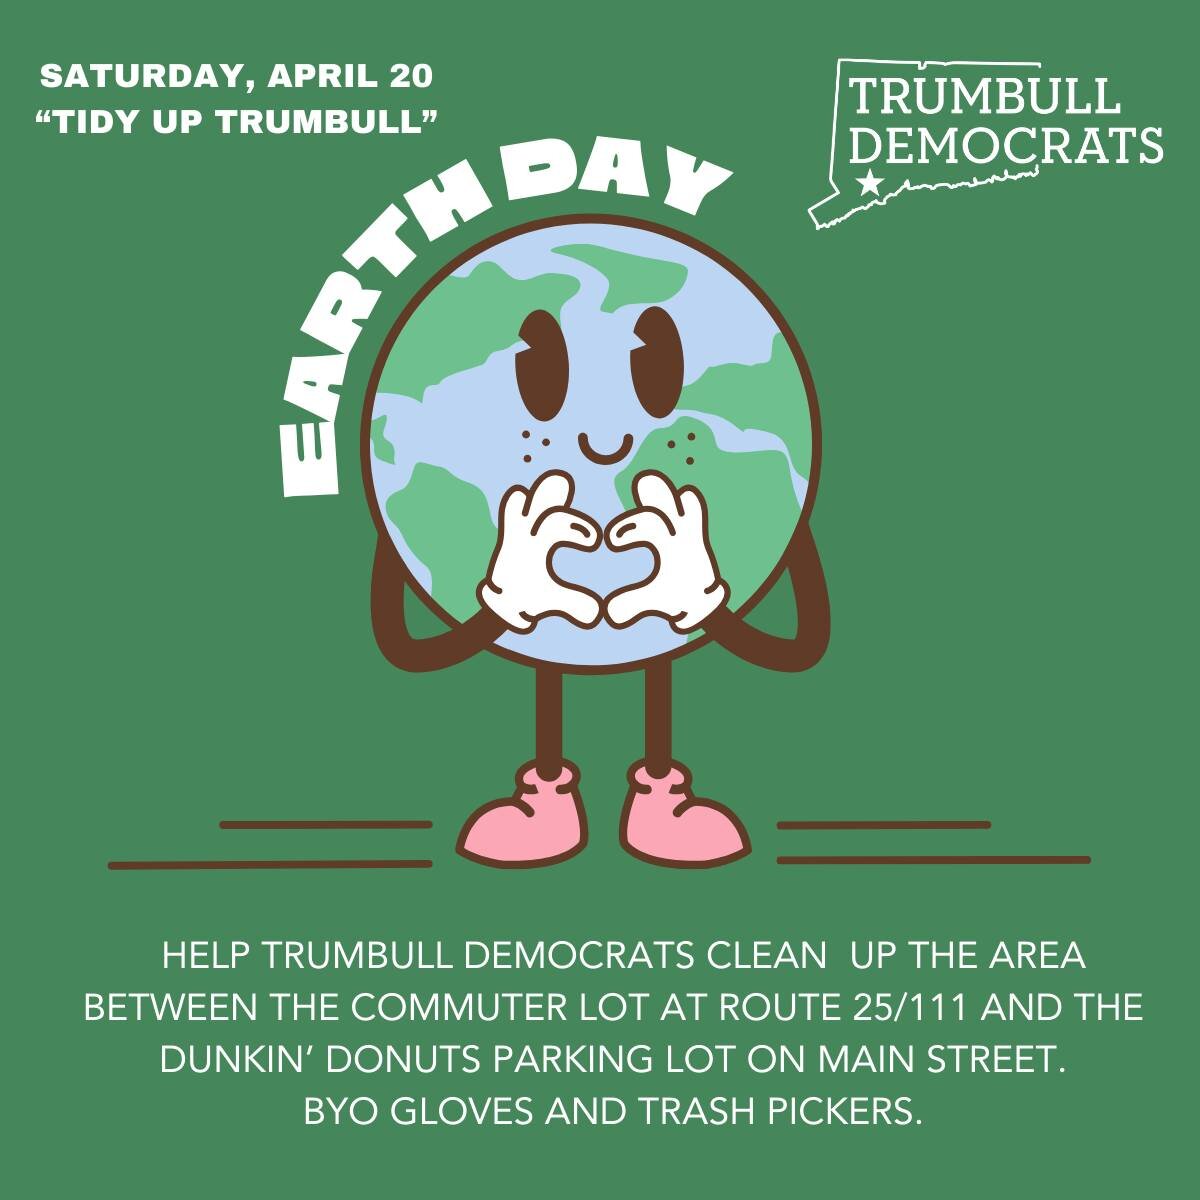 Save the Date! Join the Trumbull Democrats for this year's Tidy up Trumbull, sponsored by @Trumbull Community Women. We'll meet at the commuter lot on 25/111 at 9am and clean Main St until the Dunkin Donut/Ecco parking lot. Anyone is welcome to join!